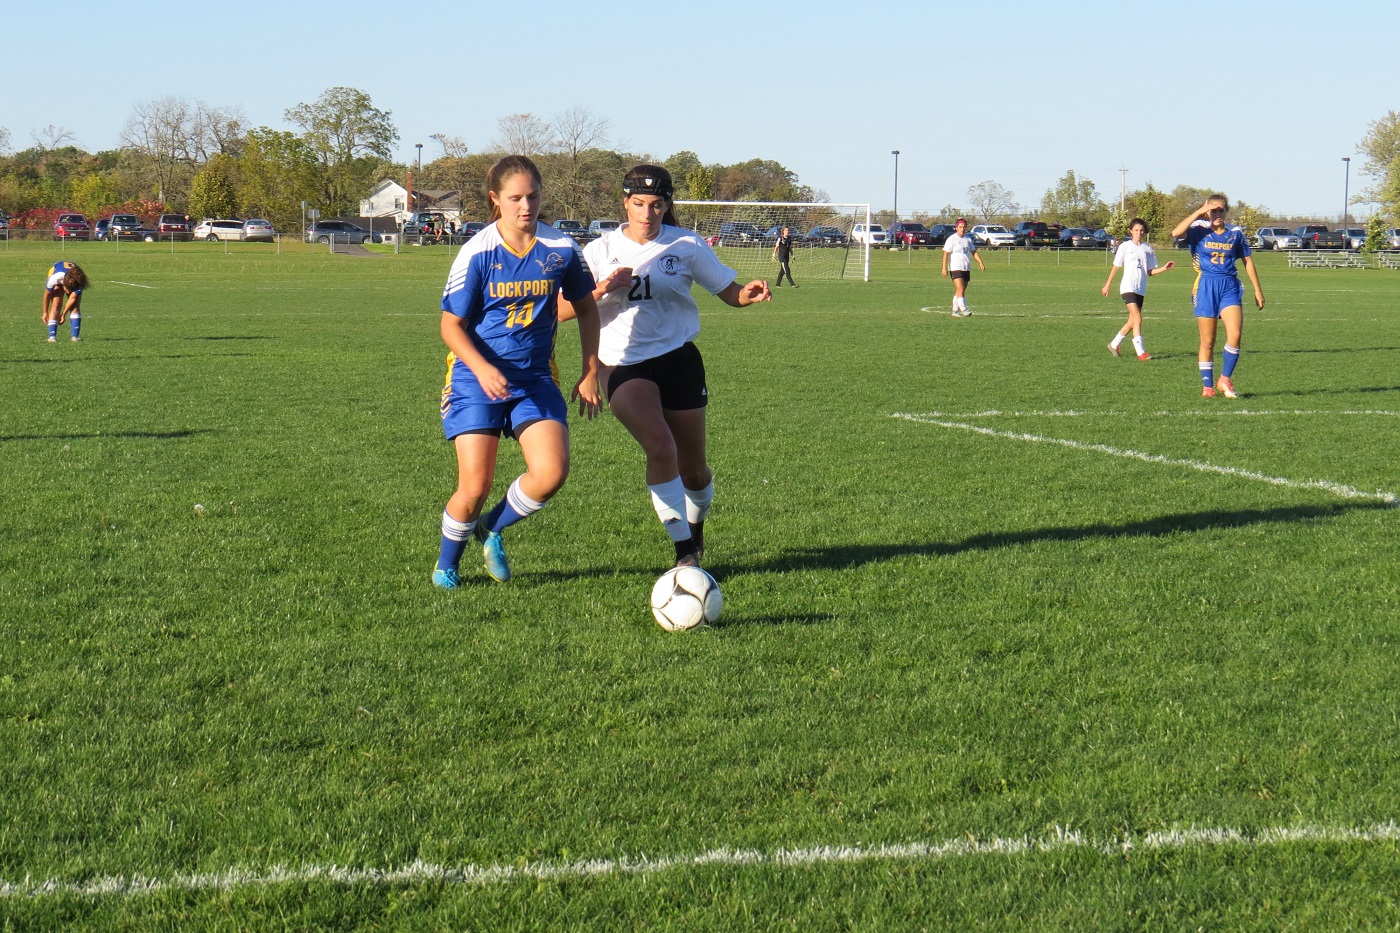 Michelle Terbot of Niagara-Wheatfield battles Rebecca Schrader of Lockport for possession of the ball.